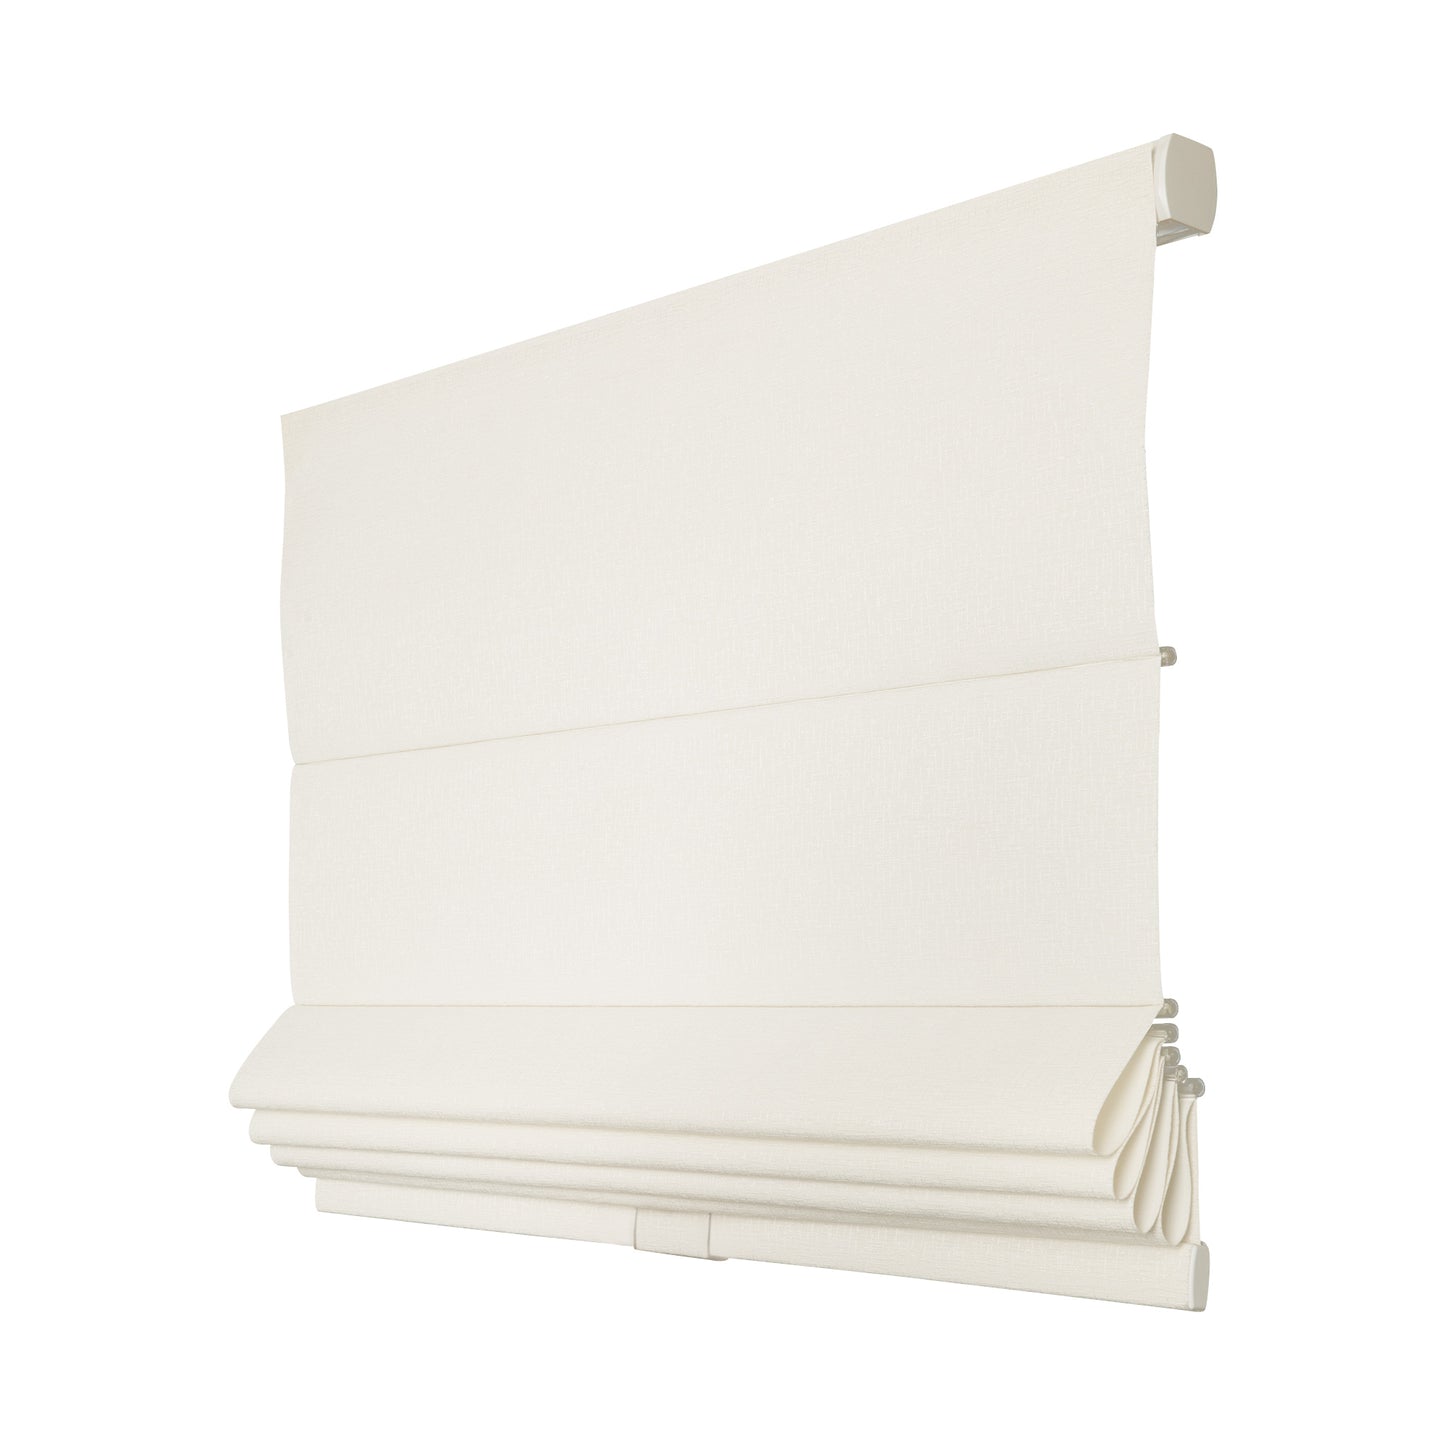 Cordless custom sheer Roman blind in light neutral color, designed for eco-friendly and child-safe home environments